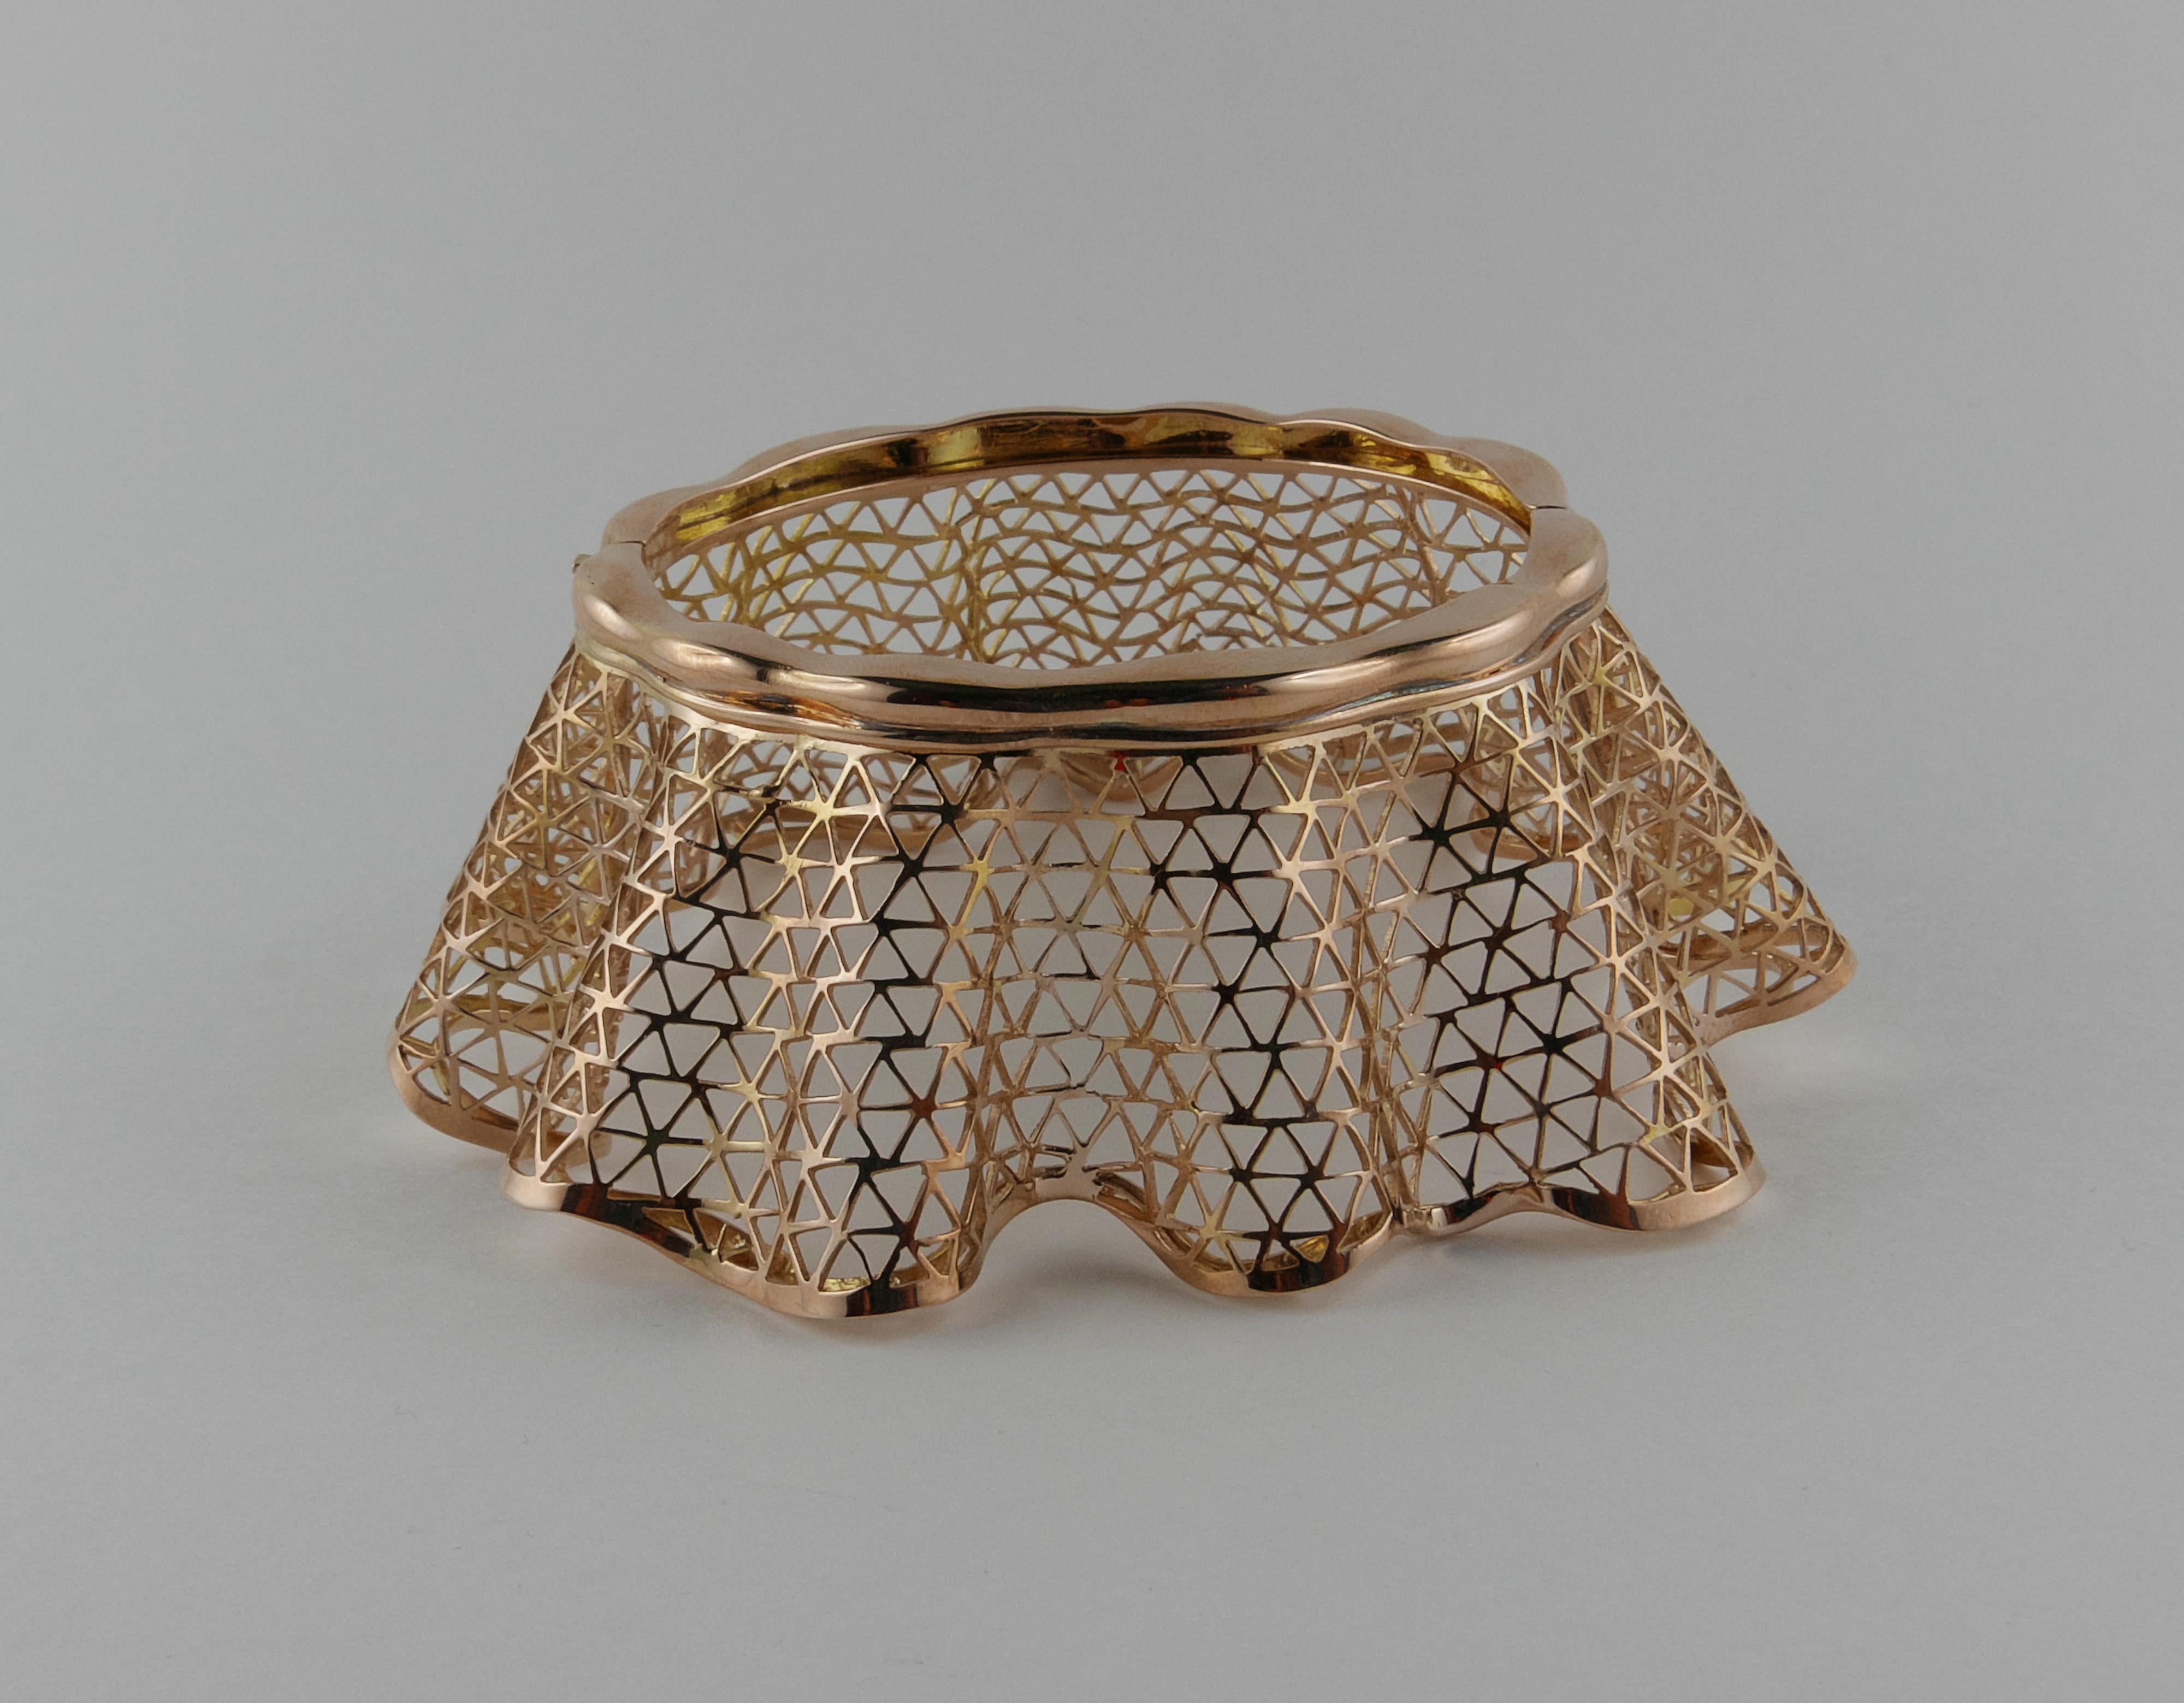 Sleek and unconventional extra wide 1940s Bracelet with Lictorian Fasces stamp, crafted in Italy in 18 karat Rose Gold, featuring a hand-woven design accented with curled edges that create a harmony of texture and flow. Entirely hand made, the